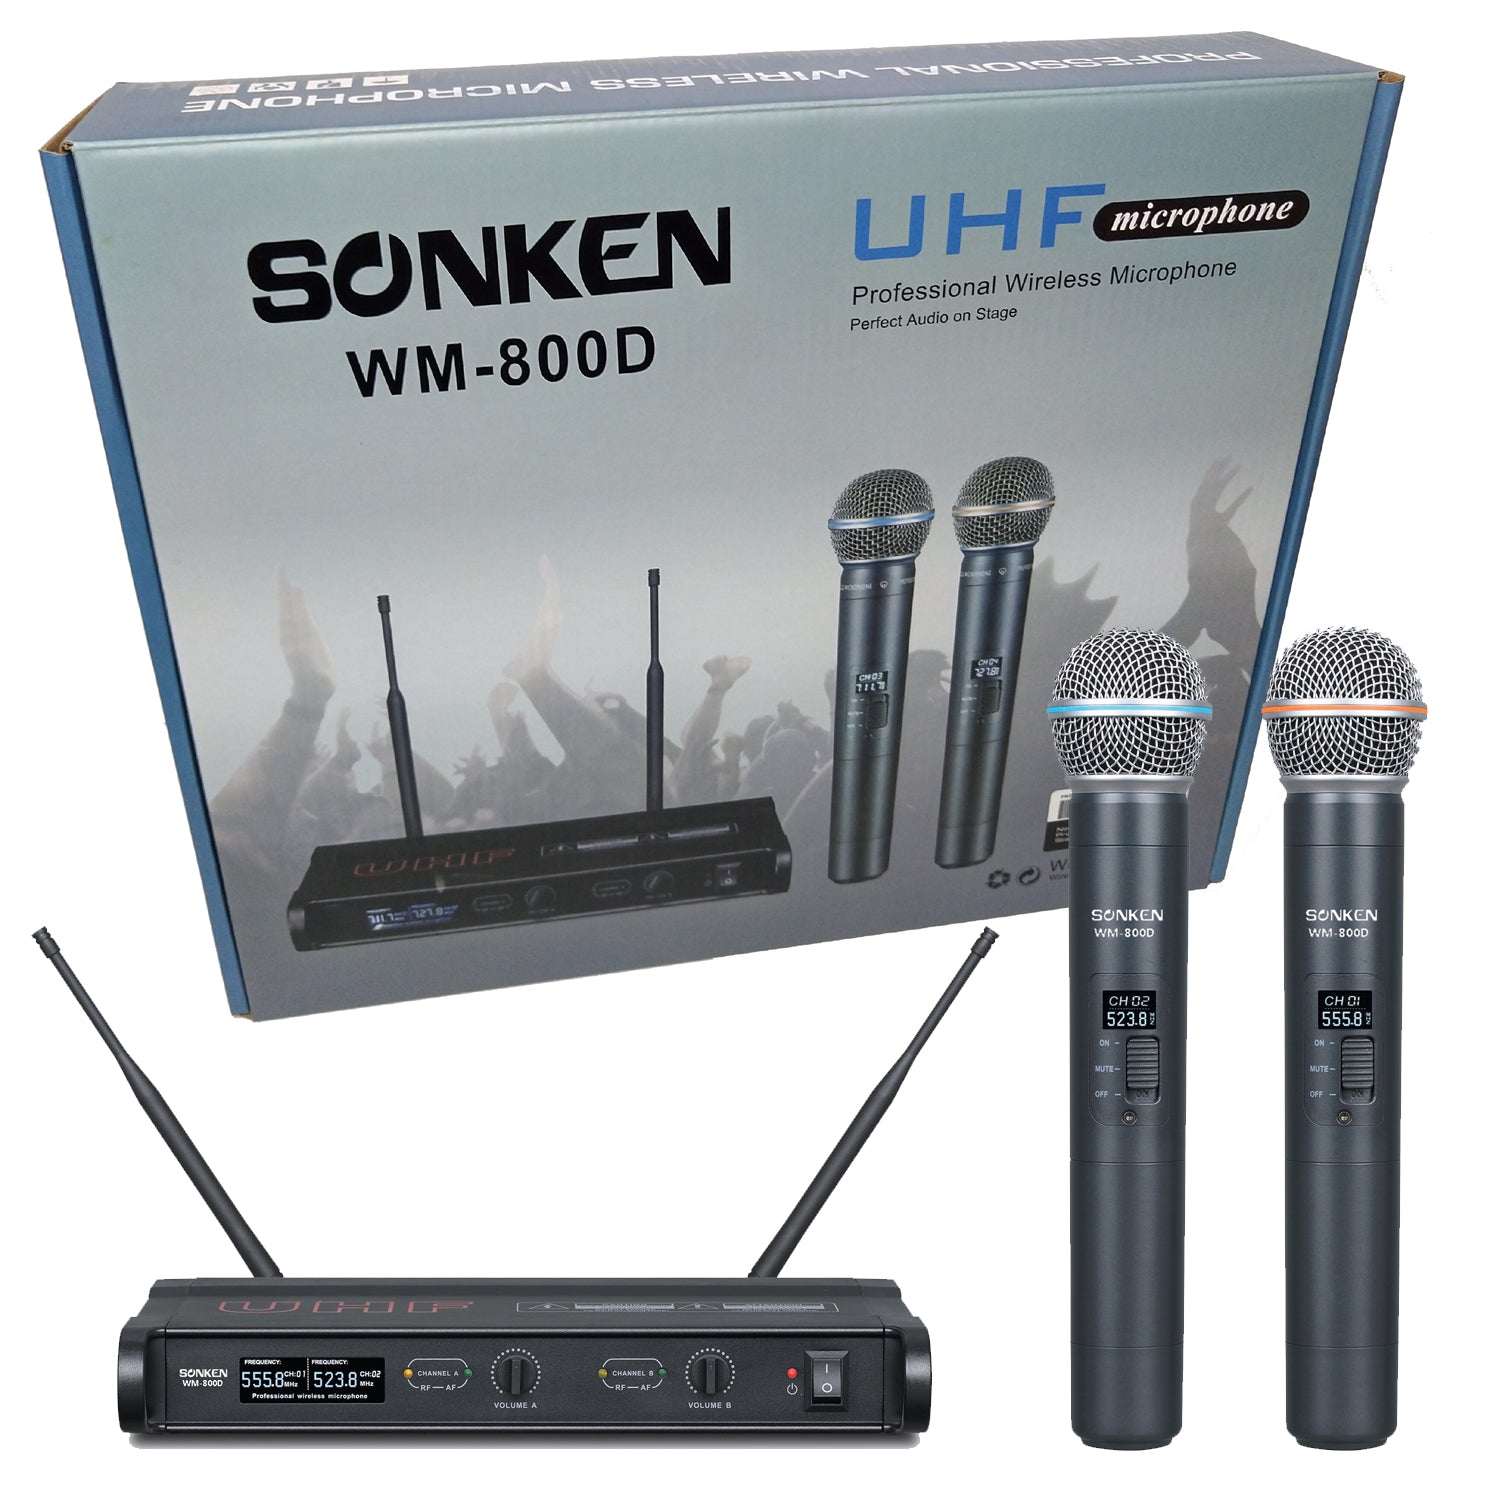 Sonken WM-800D Pro UHF Wireless Microphones (2) and (2) Body Packs + Headsets with Receiver Unit - Karaoke Home Entertainment